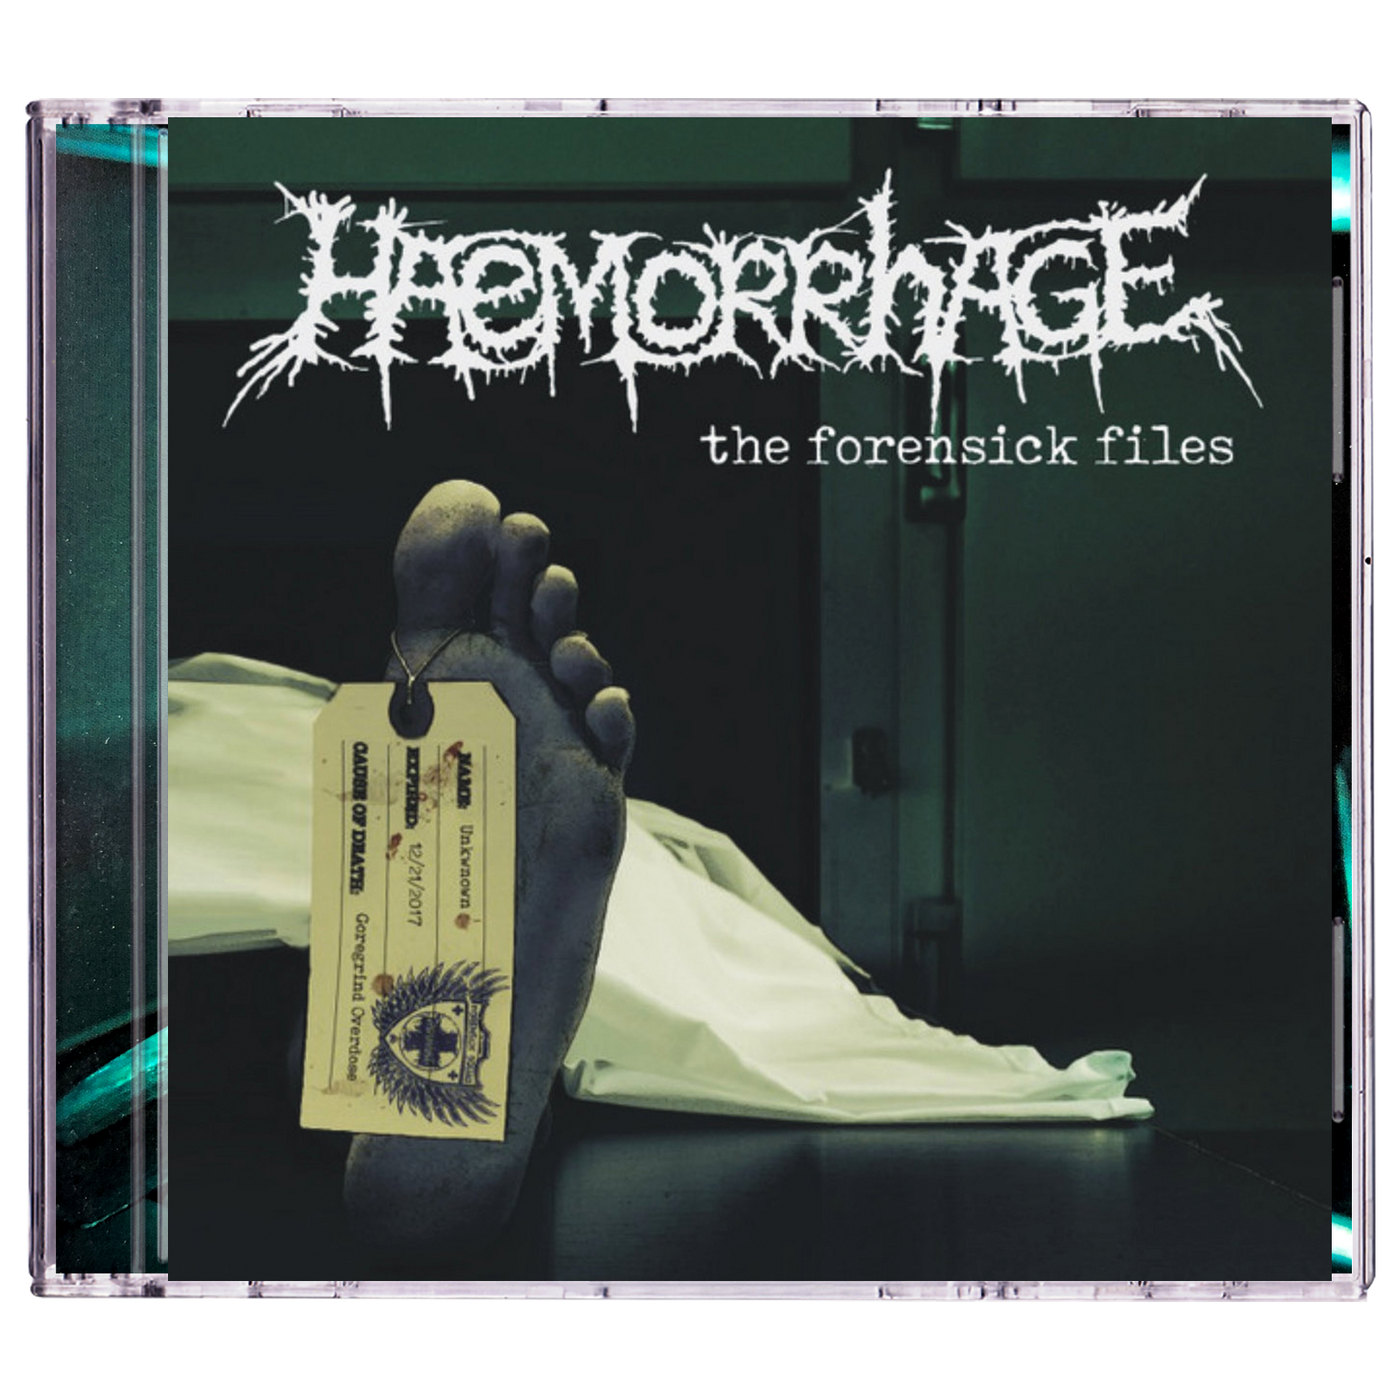 Haemorrhage 'The Forensick Files' CD